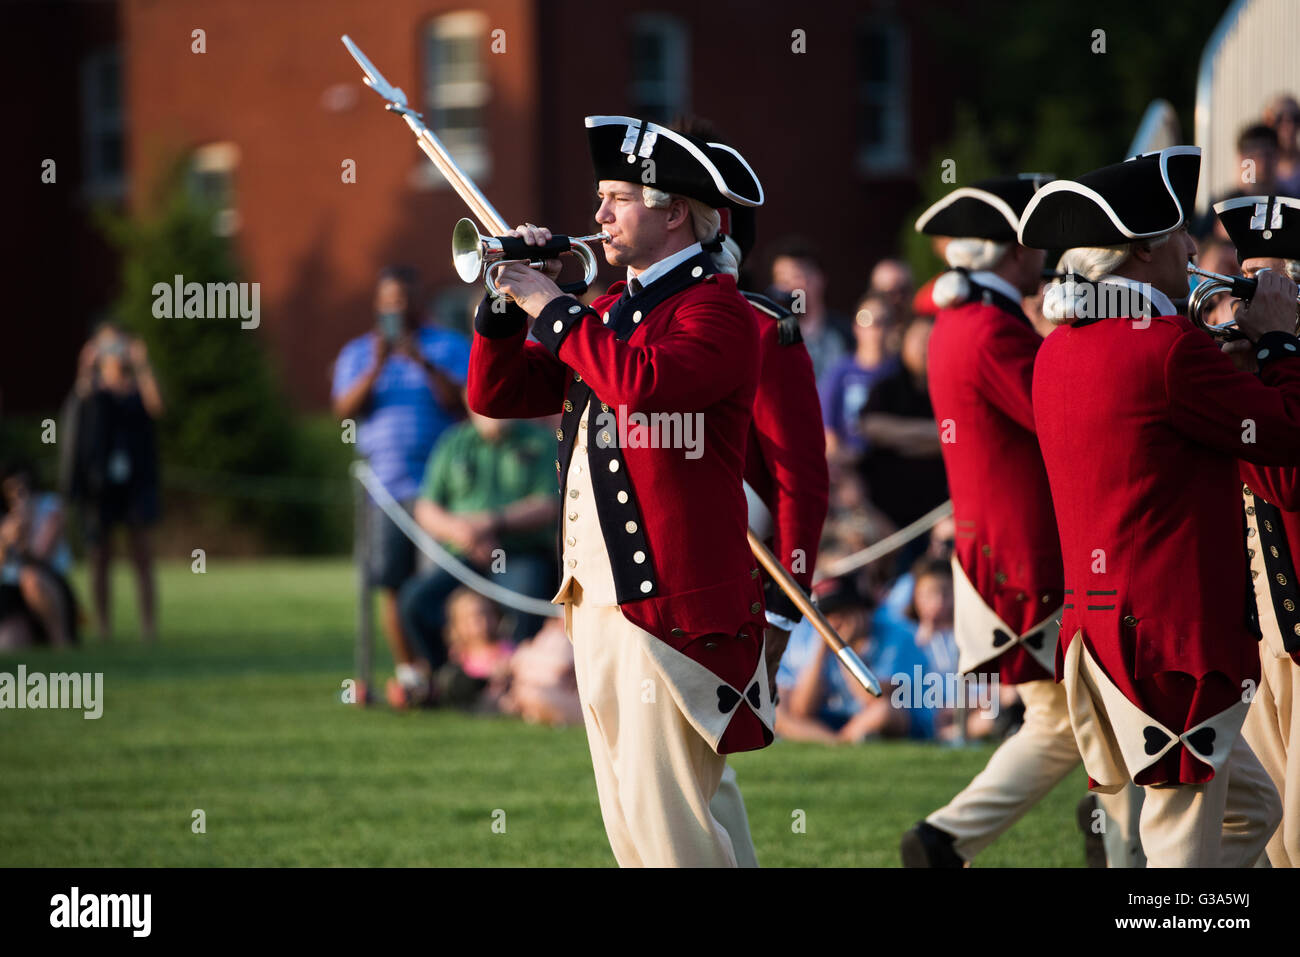 ARLINGTON, Virginia, USA - The U.S. Army's Twilight Tattoo is held on Tuesday evenings in the summer at Joint Base Myer-Henderson Hall in Arlington, Virginia. The event features various Army regiments and personnel, with live music, marching bands, and historical reenactments. Stock Photo